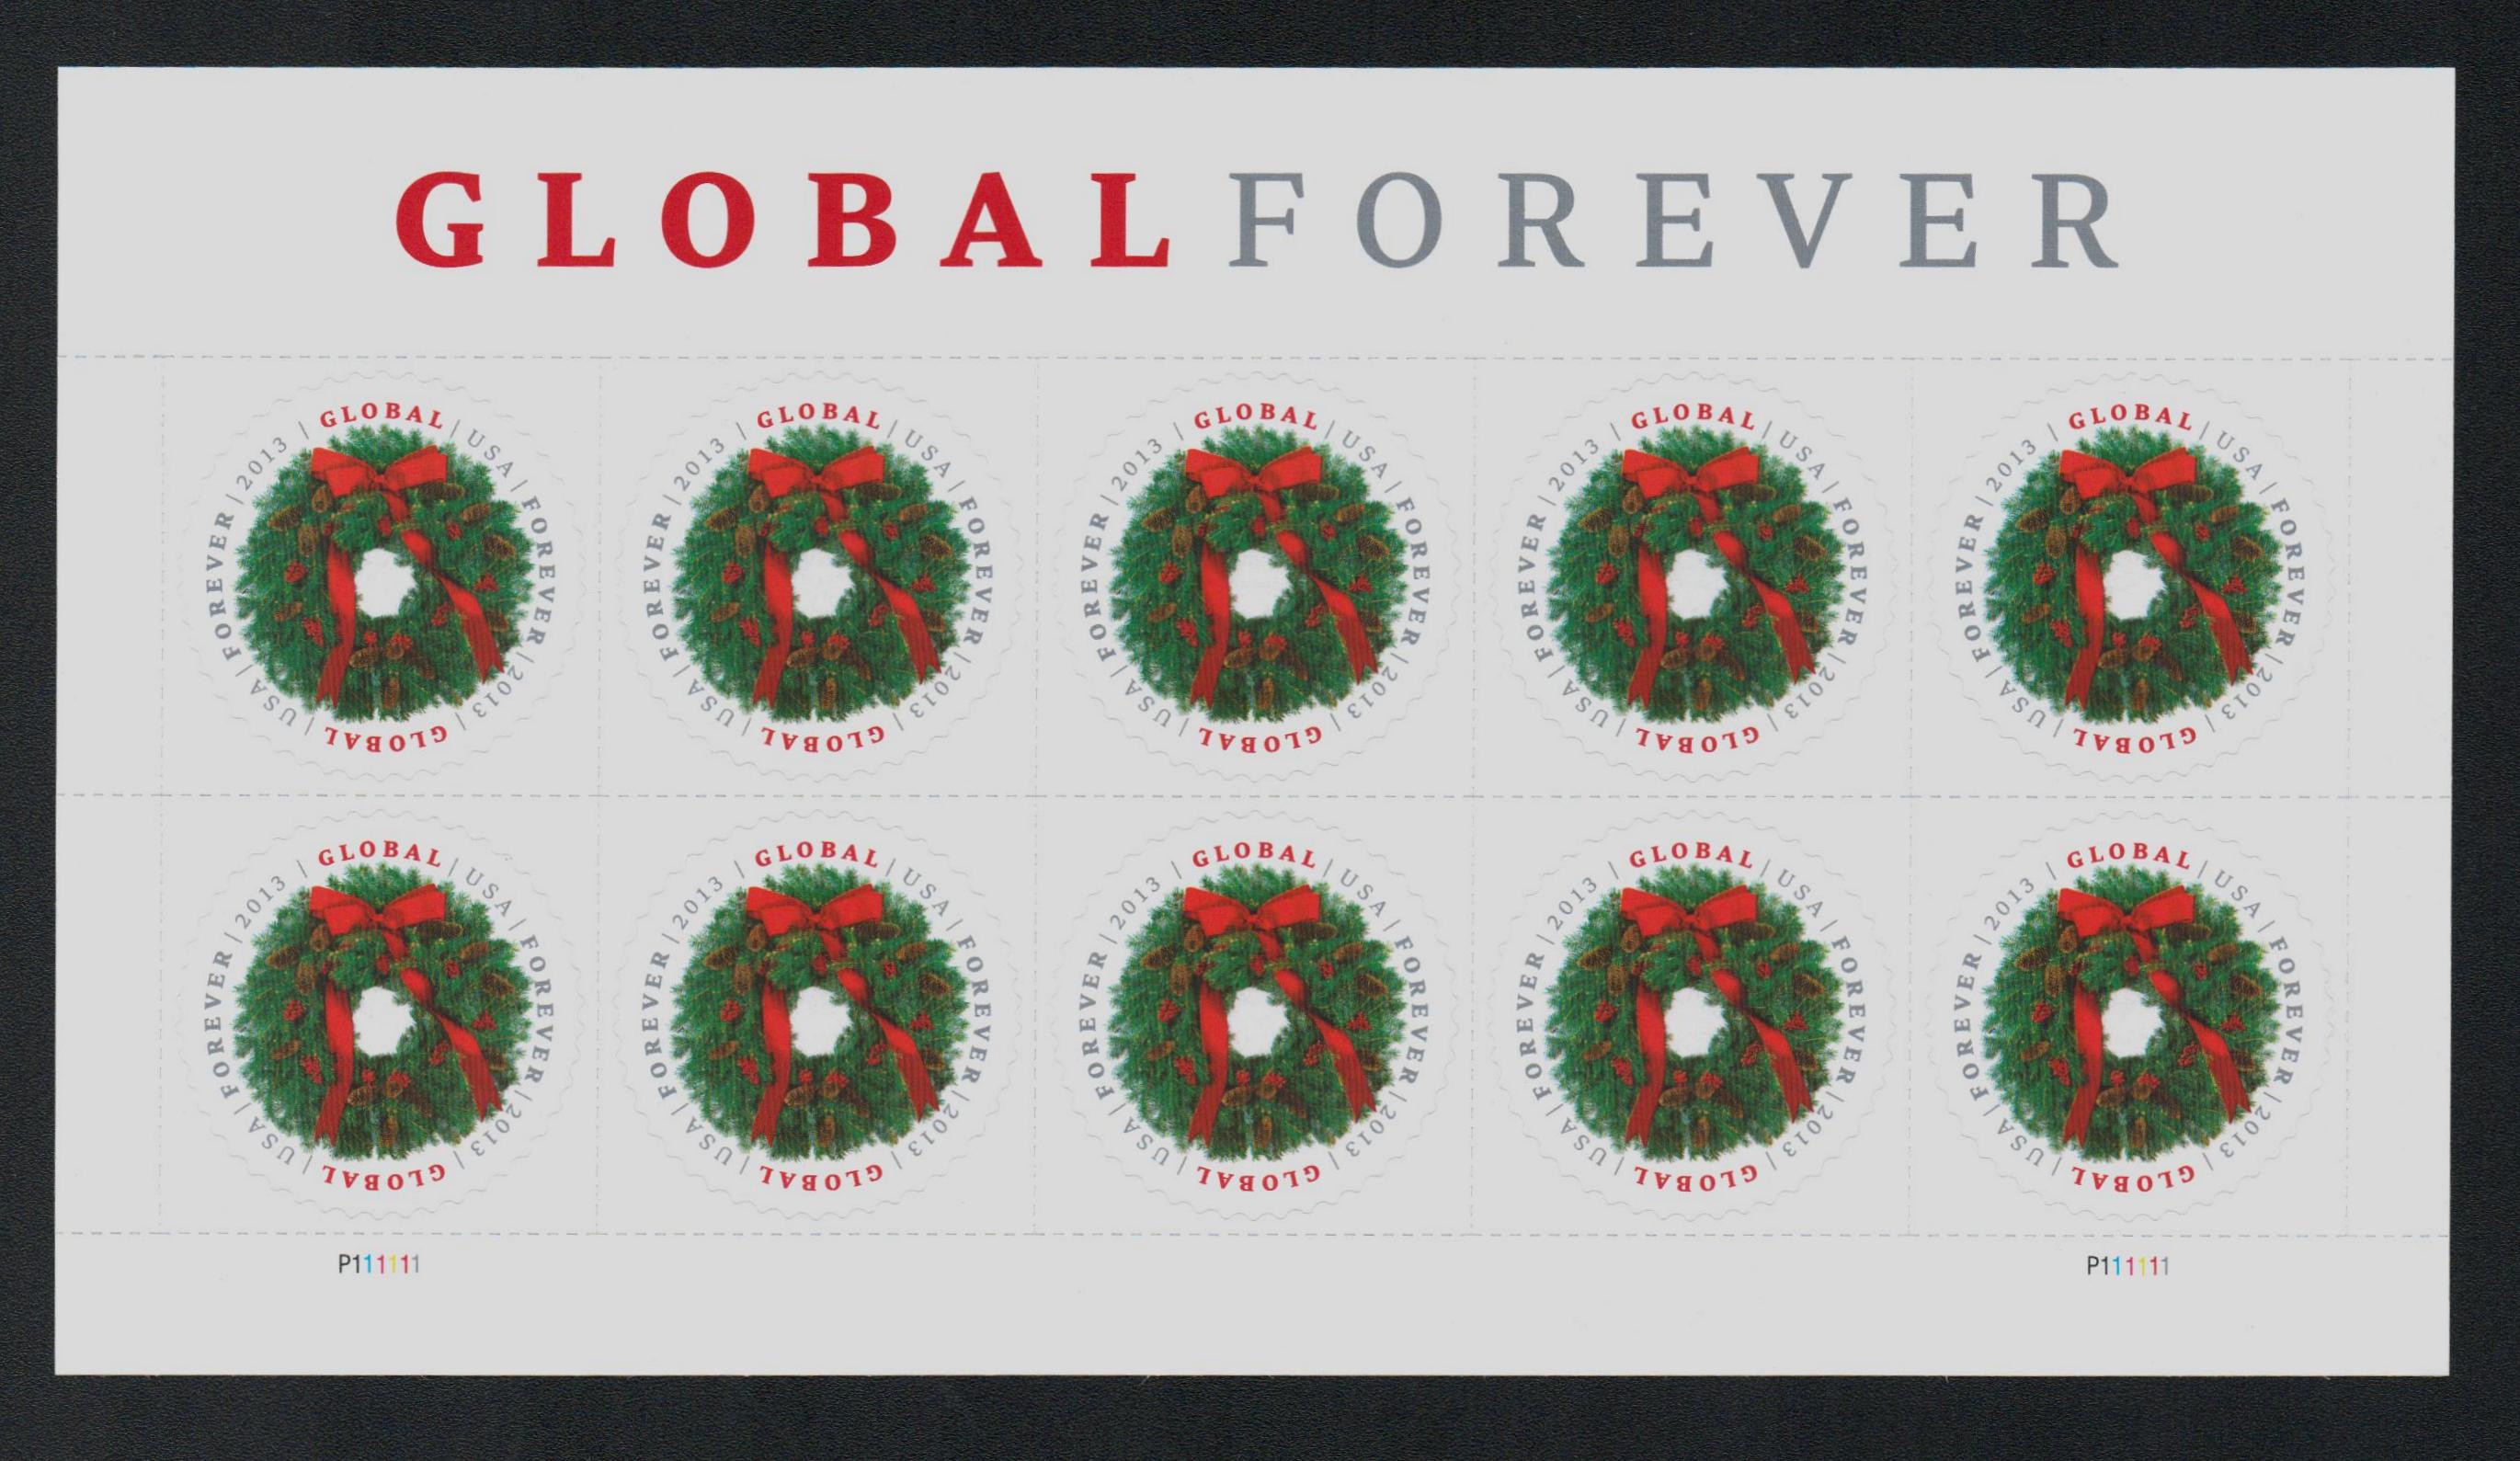 4740/5680 - 2013-2022 Global Forever Stamps, Set of 9 - Mystic Stamp Company